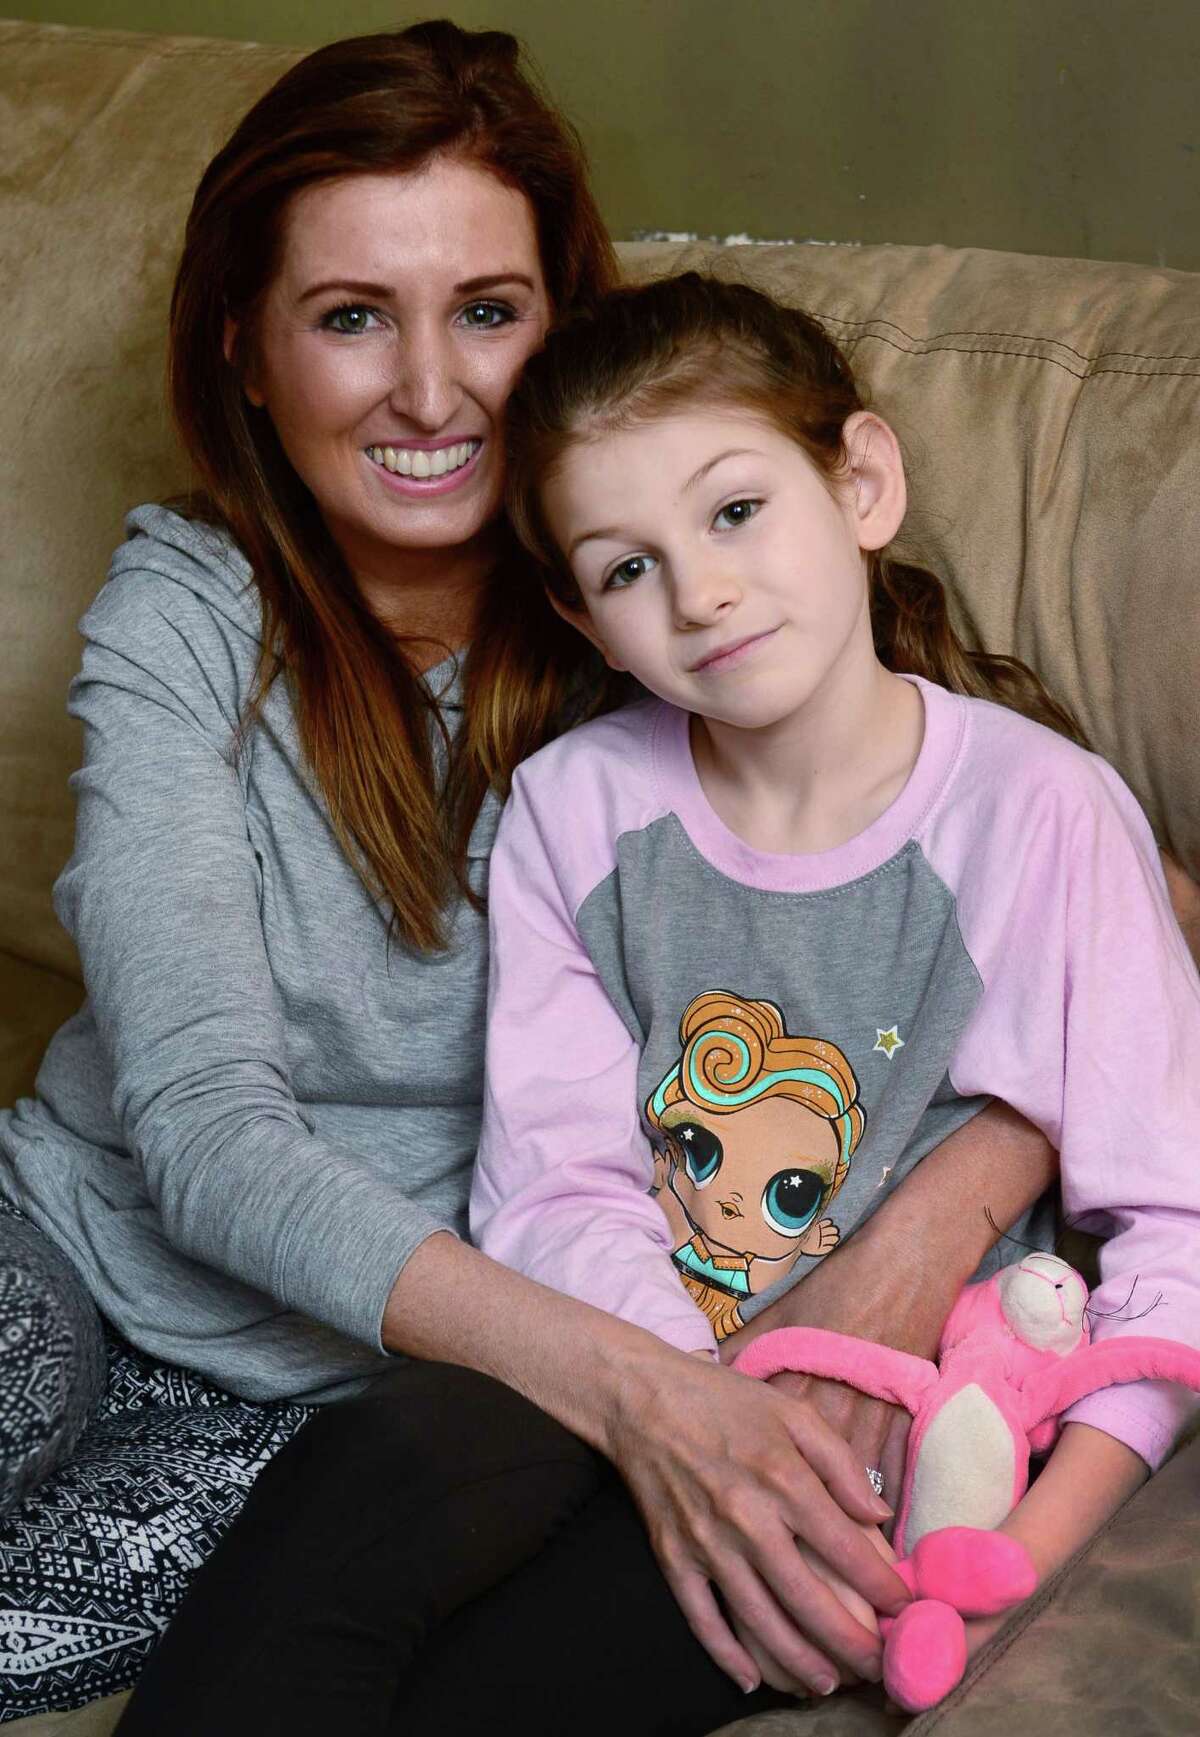 Erica DePalma, board member of the AG Bell Association for the Deaf and Hard of Hearing, with her hearing impaired daughter, Jameson DePalma, 7, at their home in Norwalk, Conn. DePalma is organizing an event for parents of children with hearing loss and their friends and families April 17, 2019. The event, also open to professionals who treat children with hearing impairments, provides a networking opportunity for parents looking to share tips and find resources -- and offers children living with disabilities the opportunity to forge friendships with each other. Childhood hearing loss is rare and some parents said they struggle to connect with families similar to theirs living in Fairfield County.